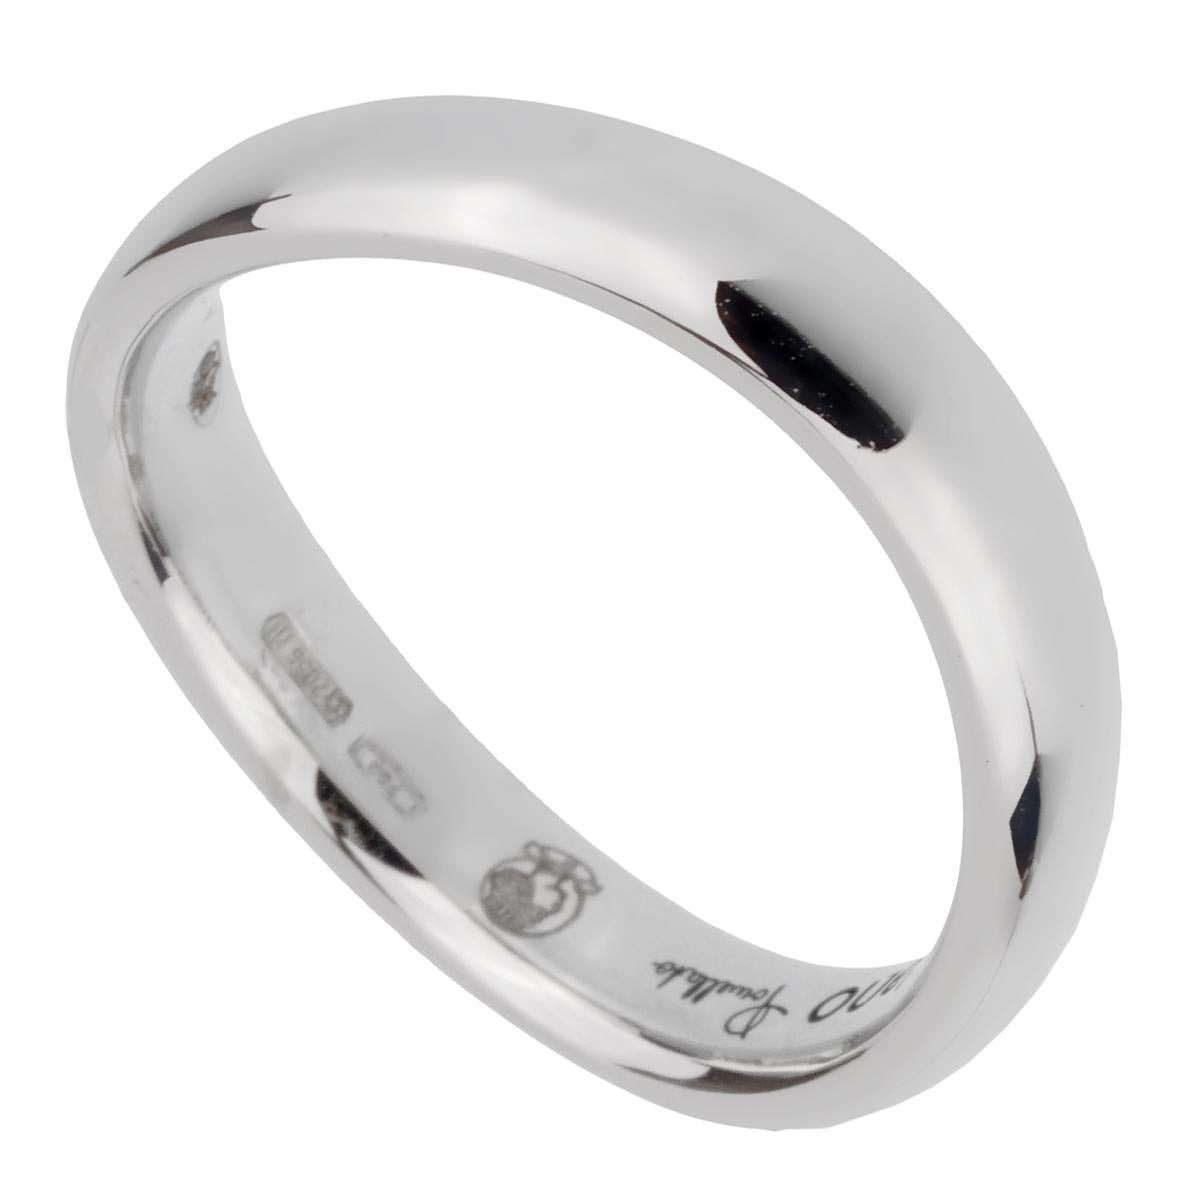 A chic Pomellato wave style band crafted in 18k white gold, the ring measures a size 5 and can be resized.

Pomellato Retail Price: $1350
Sku: 2405